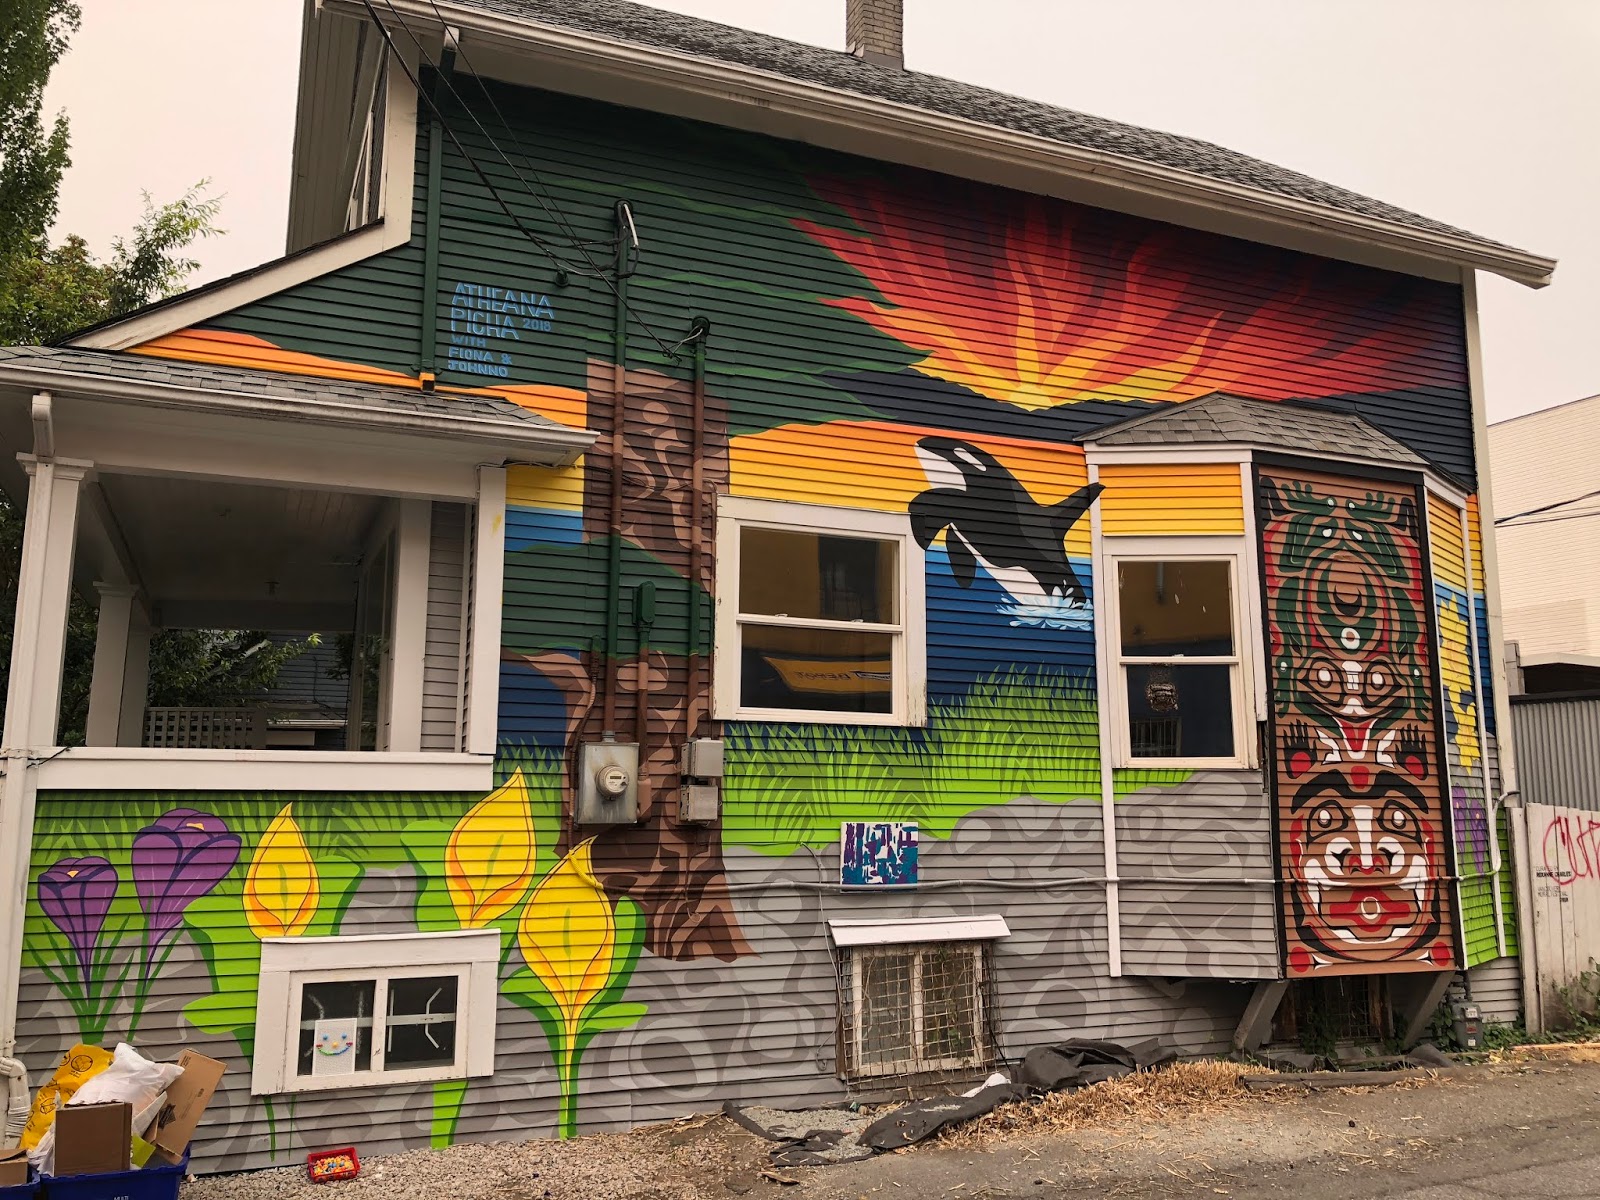 Of Smoke and Murals and Skunk Cabbage — Just a Walk in the ‘Hood